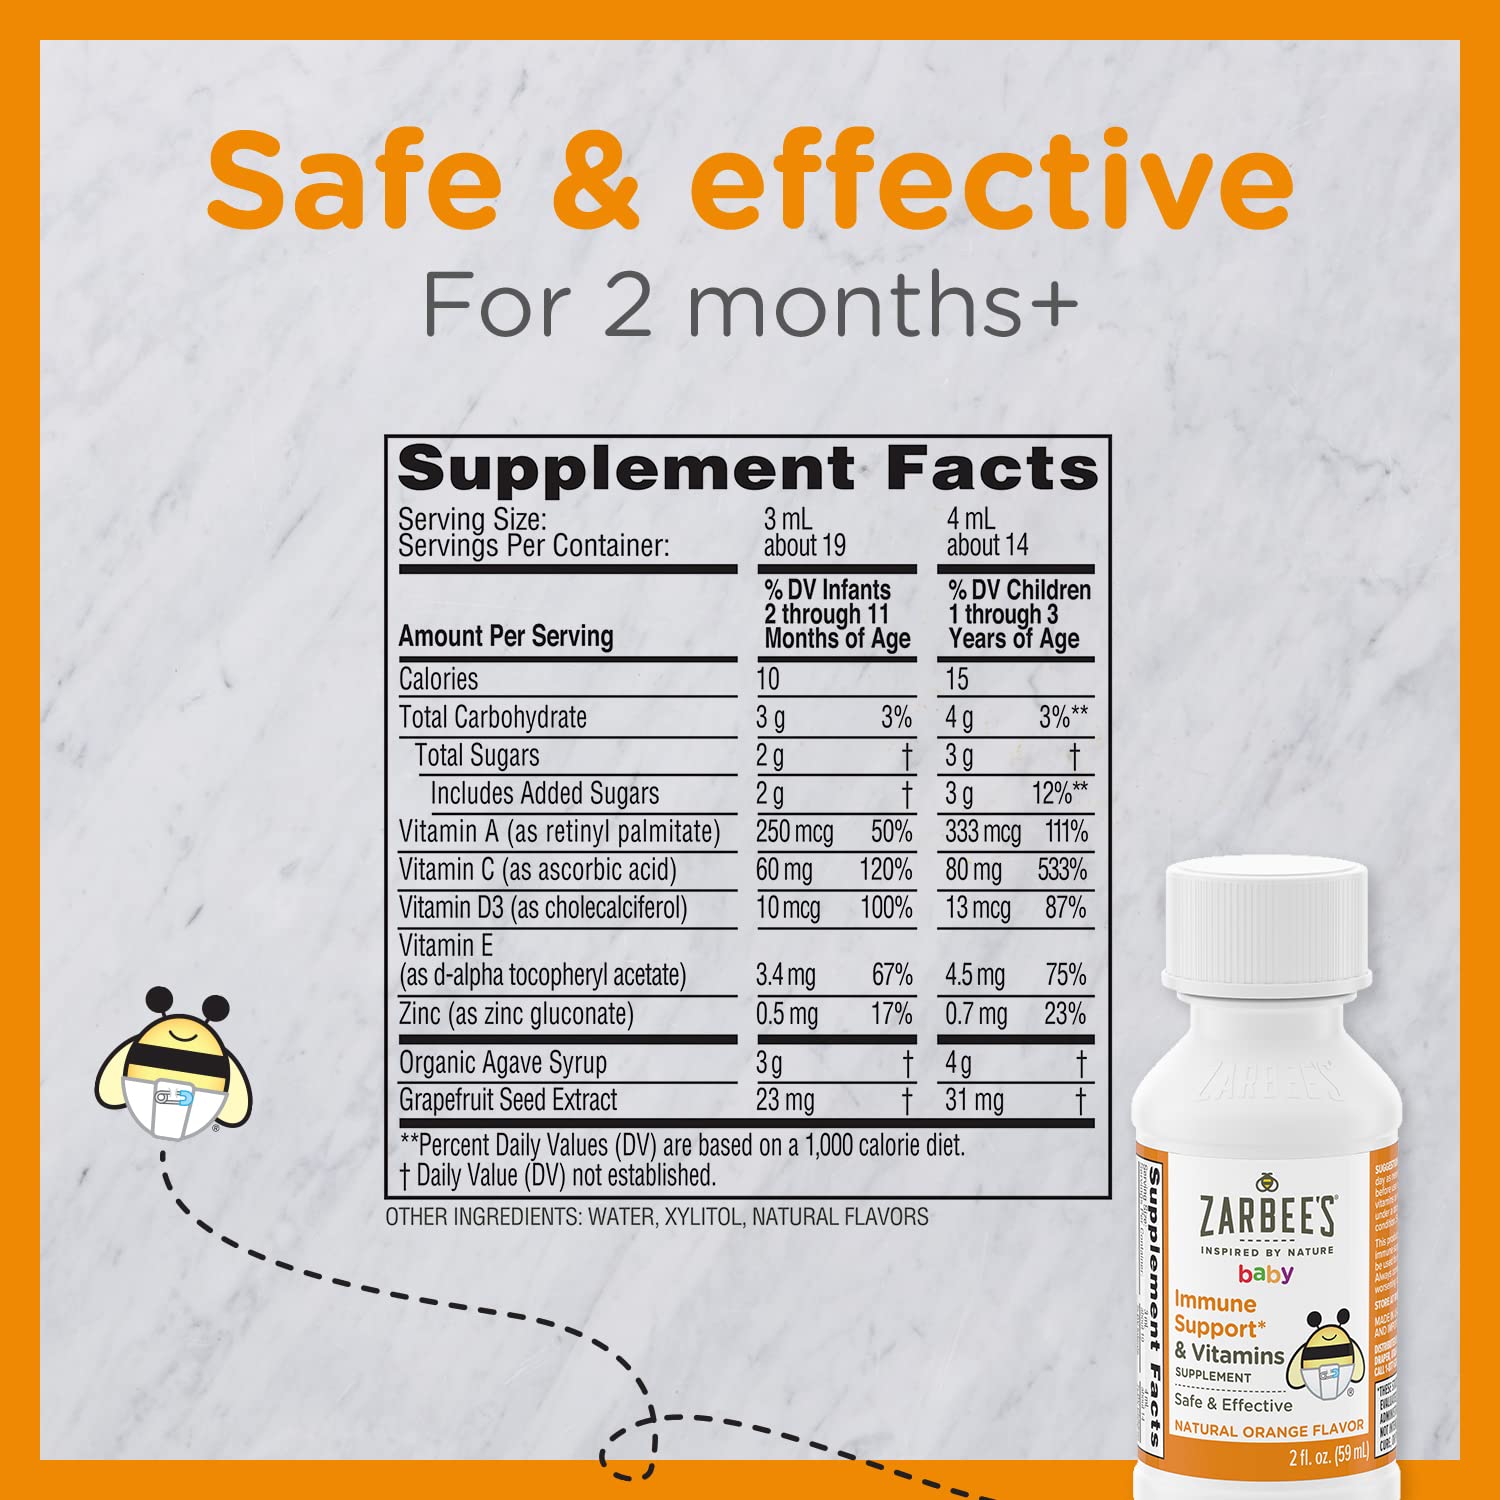 Zarbee's Baby Immune Support* & Vitamins Supplement with a Special Blend of Vitamins, Zinc, and Agave, Natural Orange Flavor, 2 Fl. Ounces (1 Box)